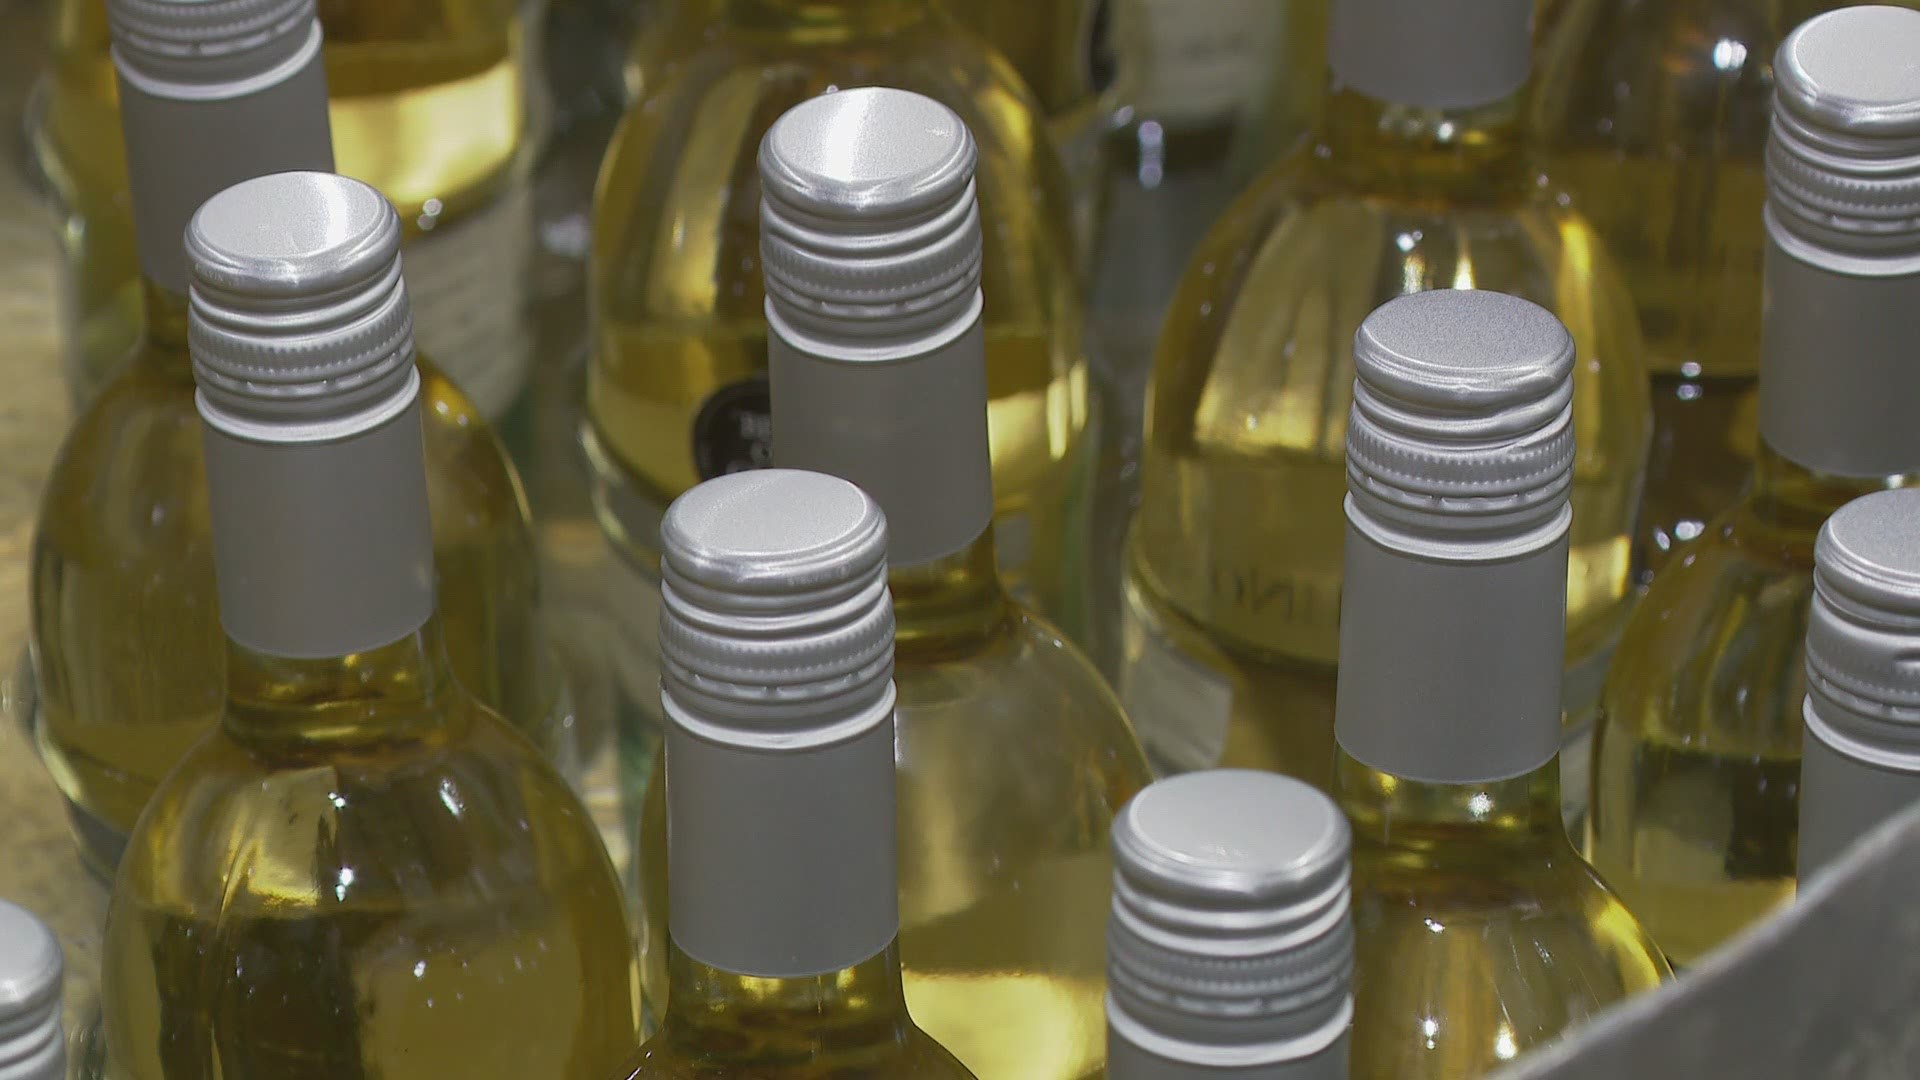 St. Julian Wine Co., based in Paw Paw, Mich., has been in business since 1921, thanks to generations of family who made sure it rolled with the changes.